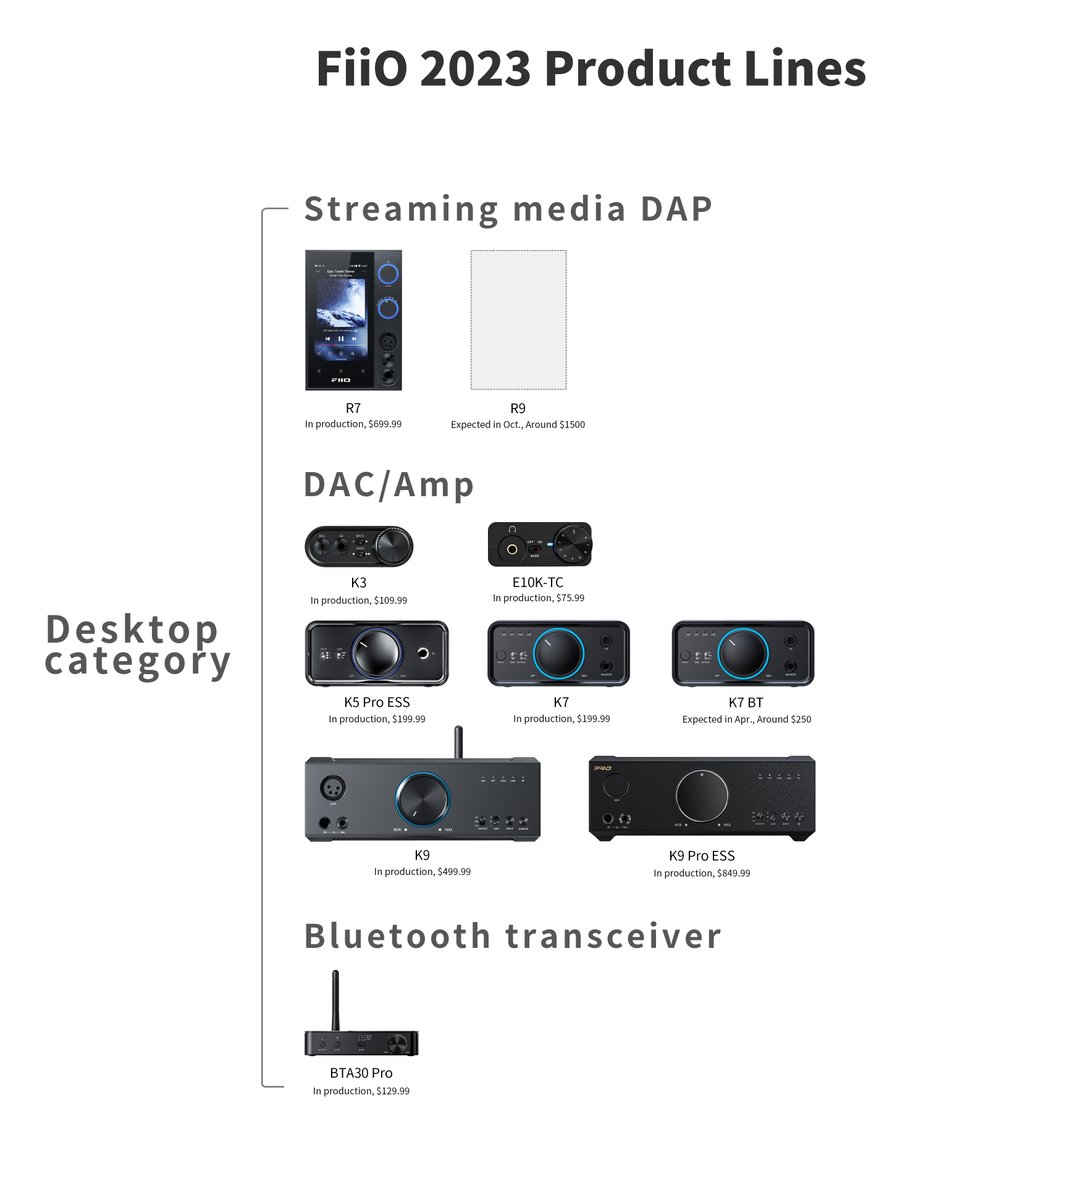 This Device Is All You Need - FiiO R7